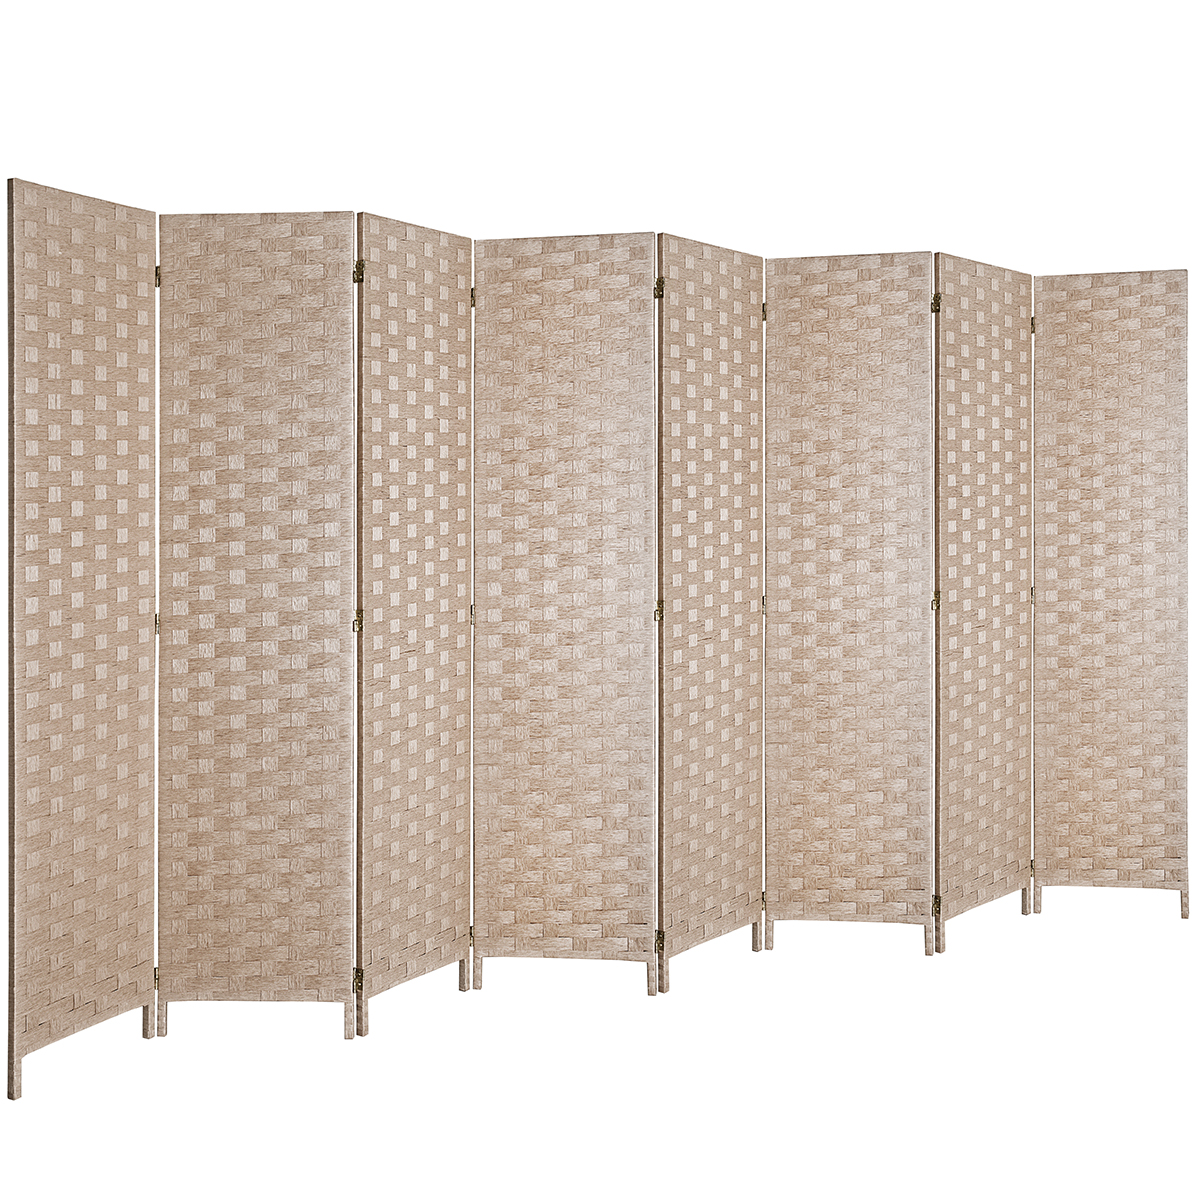 Freestanding Room Dividers Coffee Maxhonor 6 Panels Room Divider Double Hinged,Folding Privacy Screens 6 FT Tall/&Extra Wide Weave Fiber Room Divider with 2 Shelved